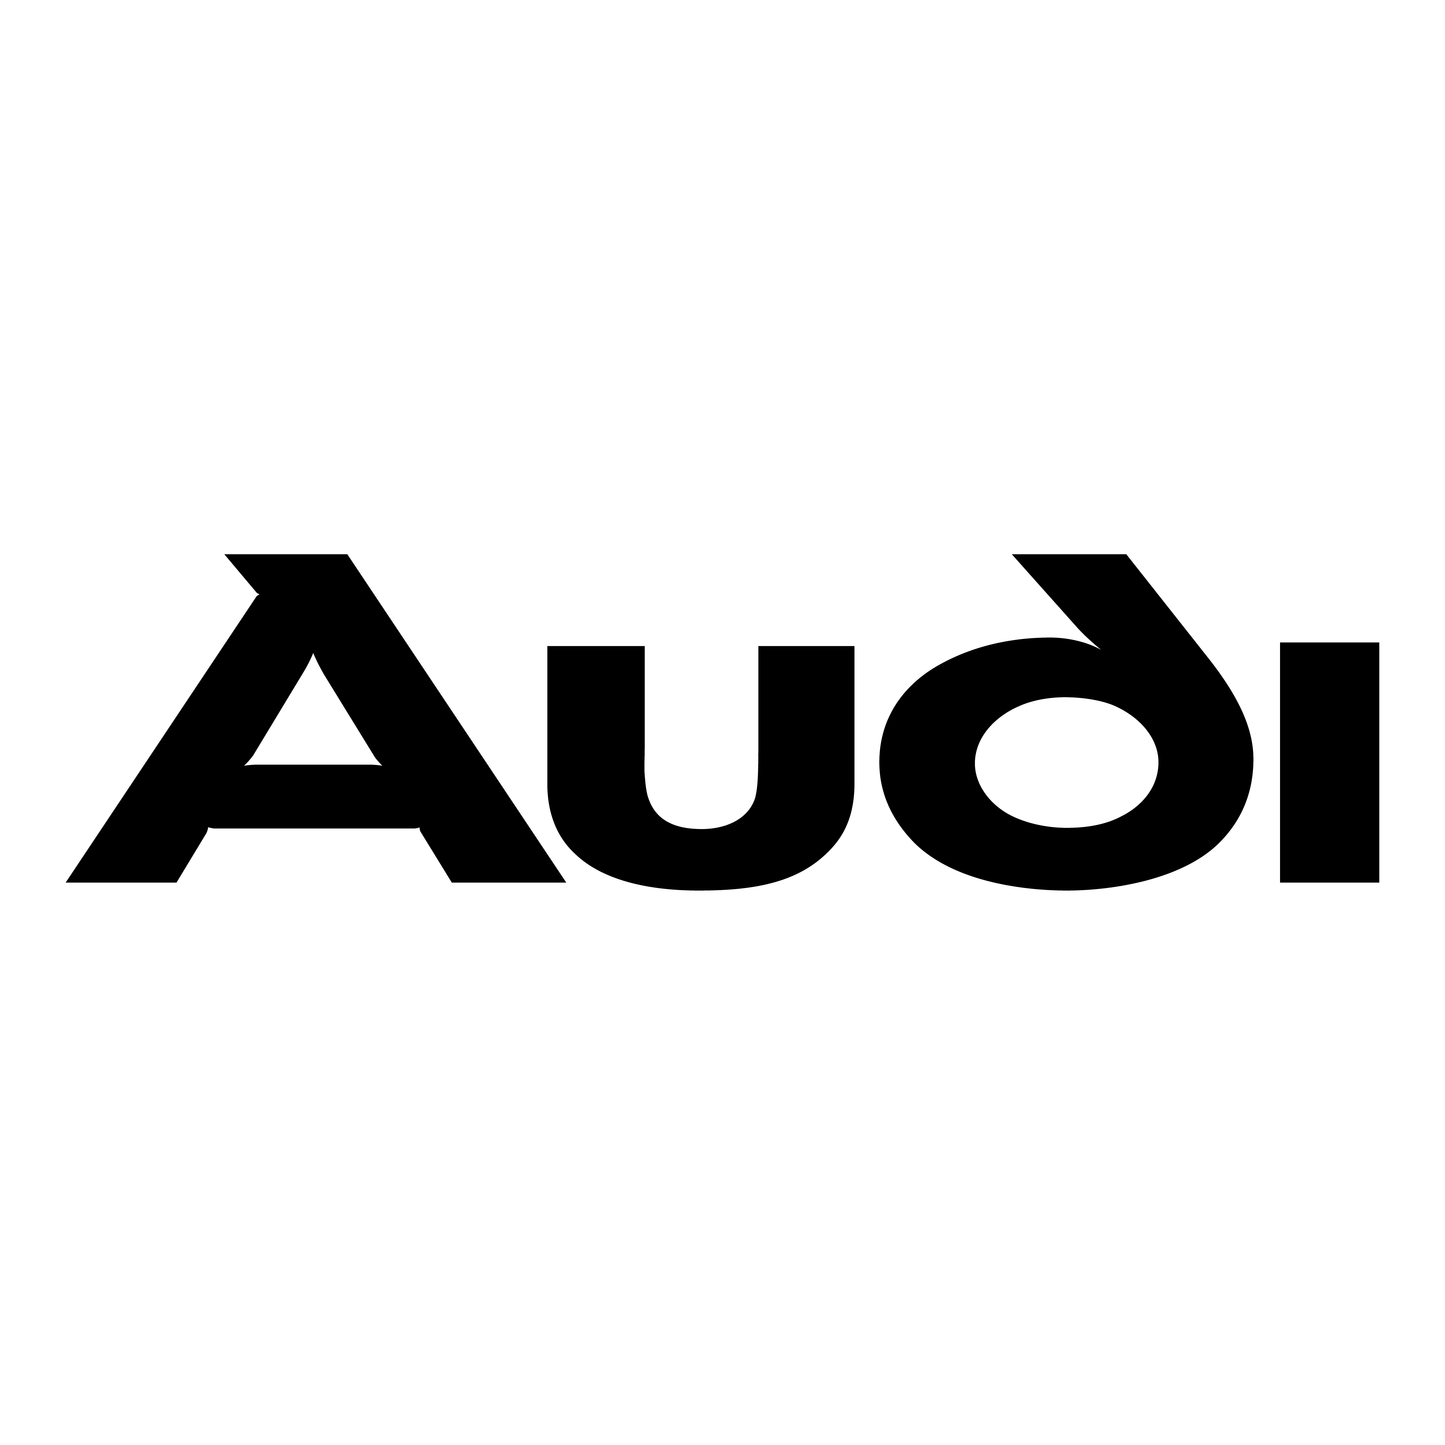 AUDI Decal Stickers